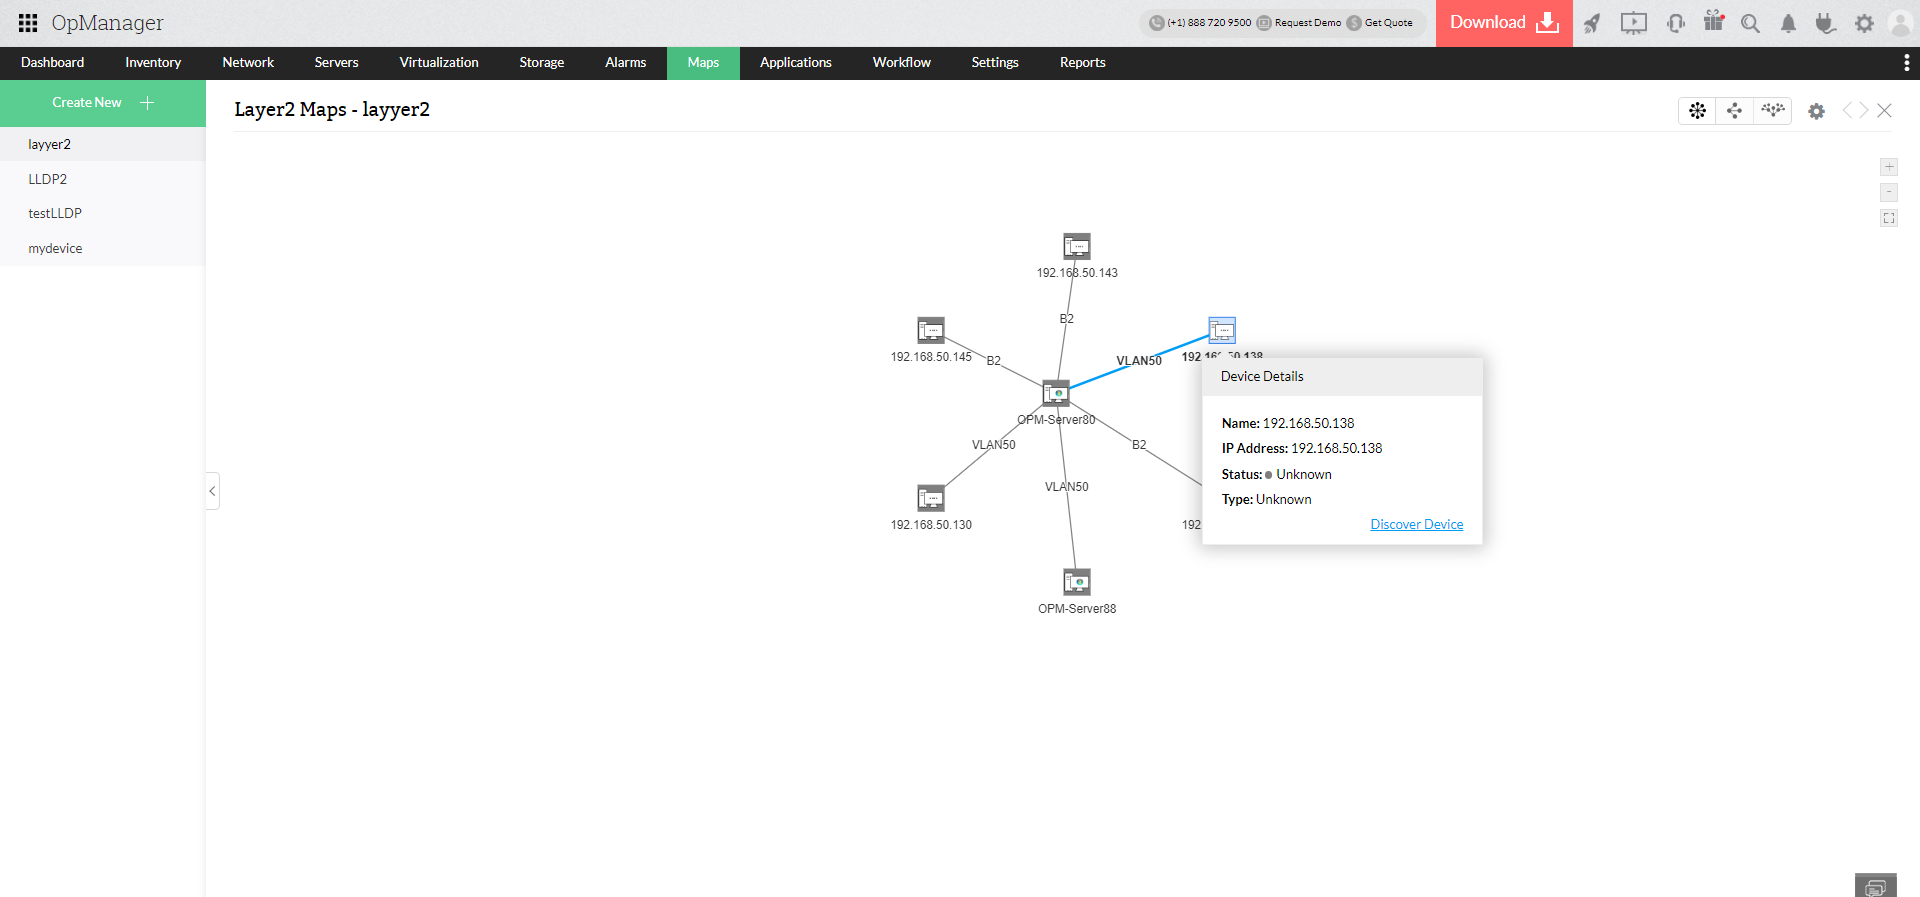 Network topology mapping-ManageEngine OpManager